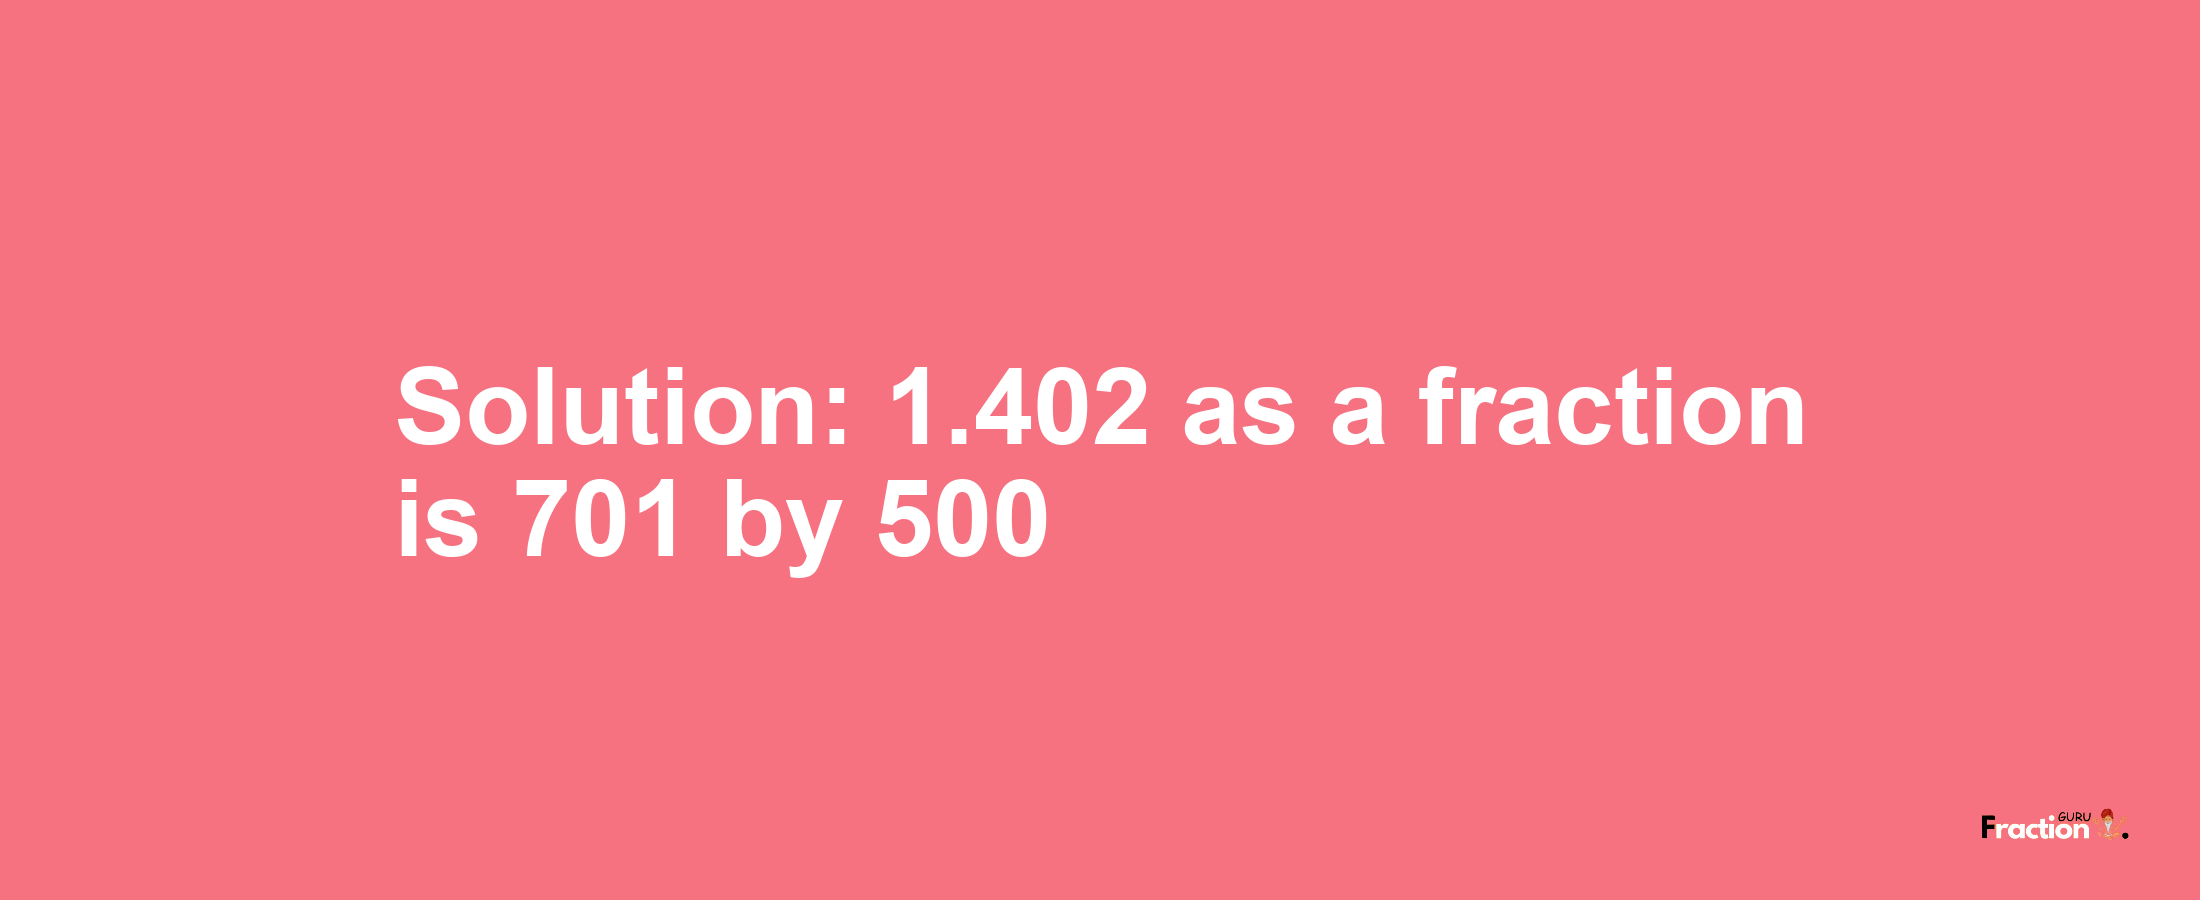 Solution:1.402 as a fraction is 701/500